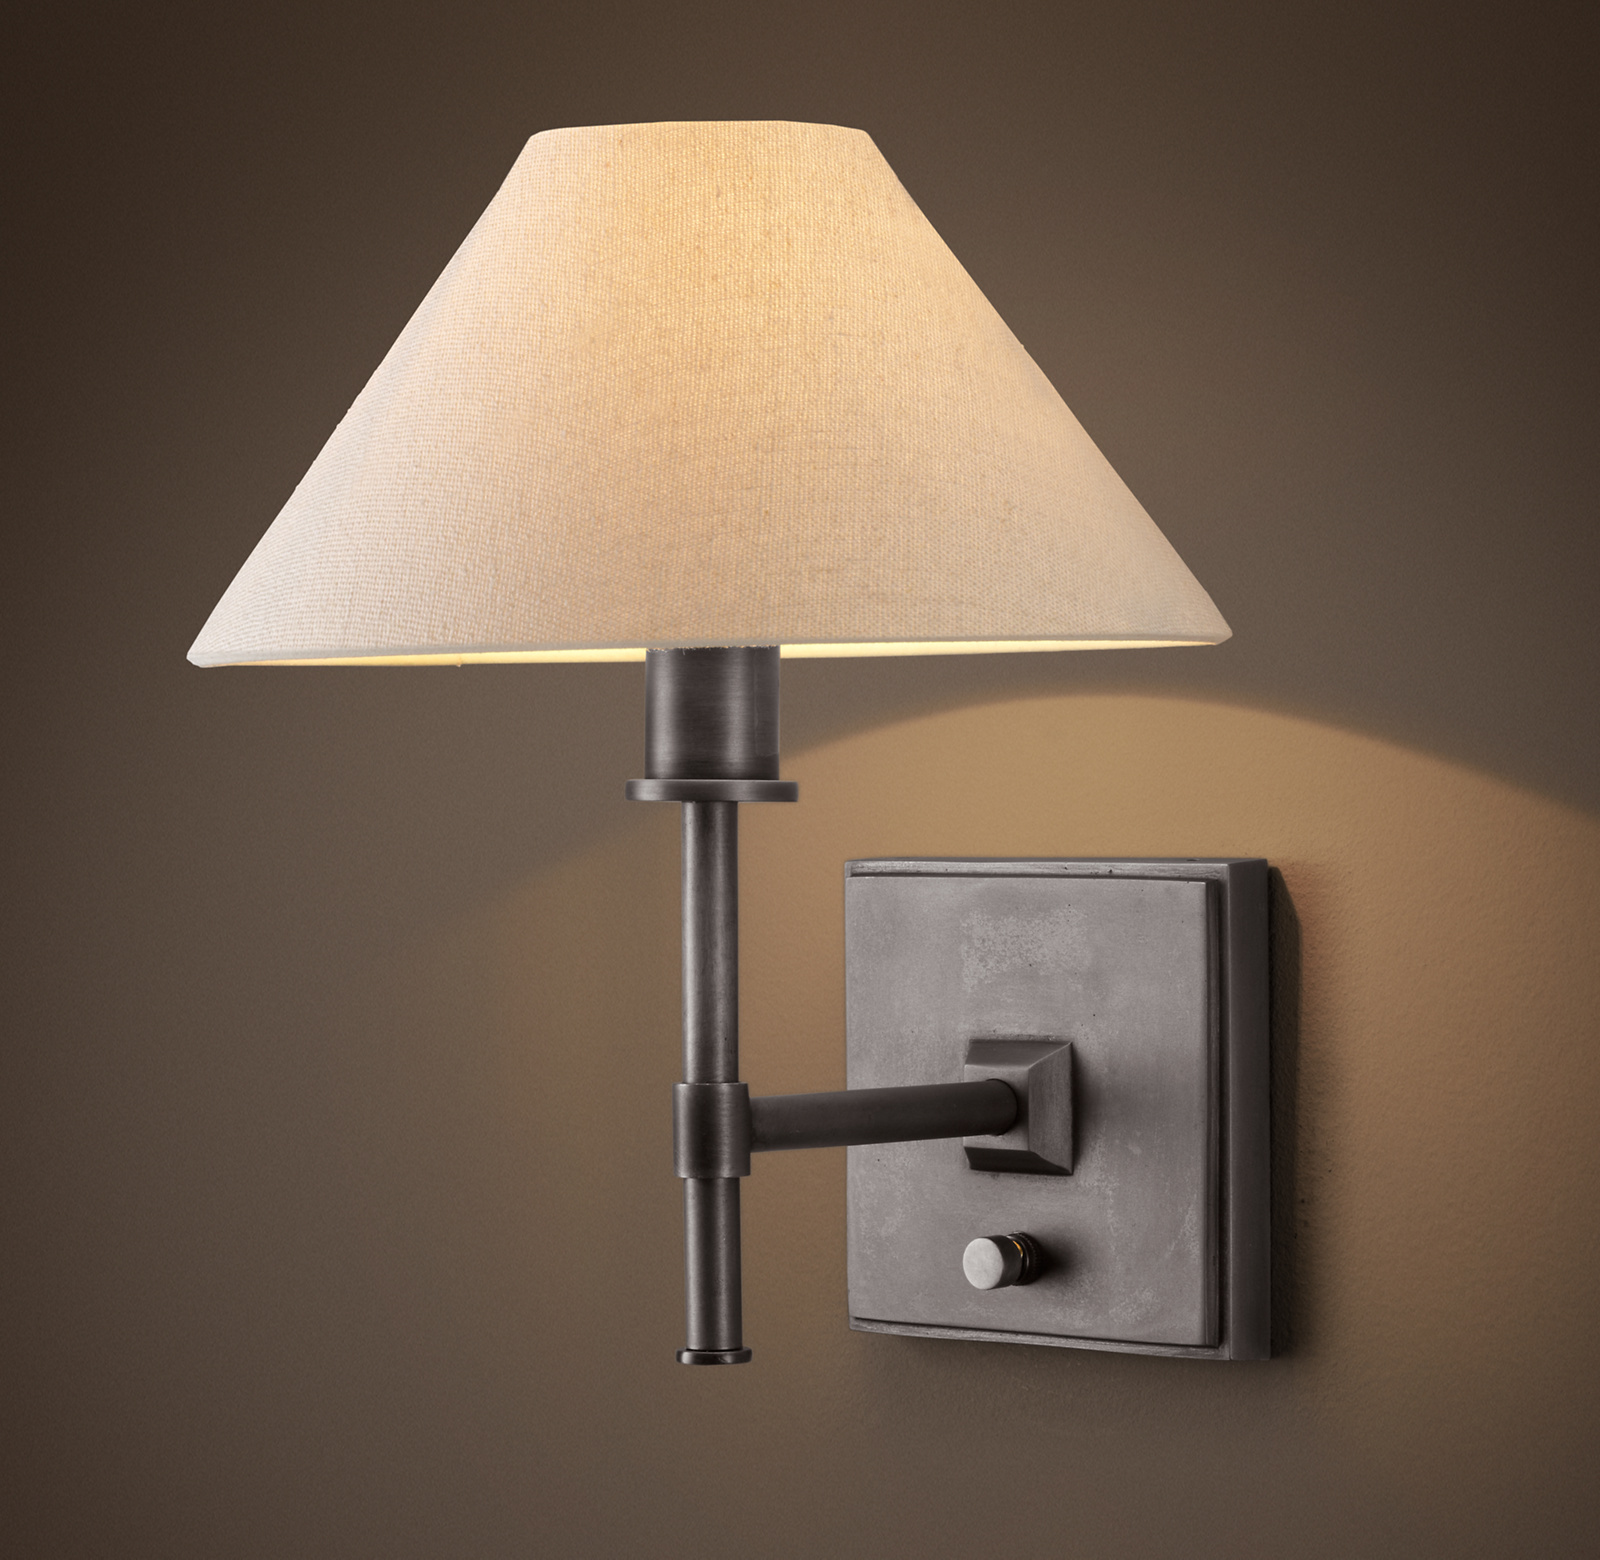 Shown in Bronze with White Linen shade.